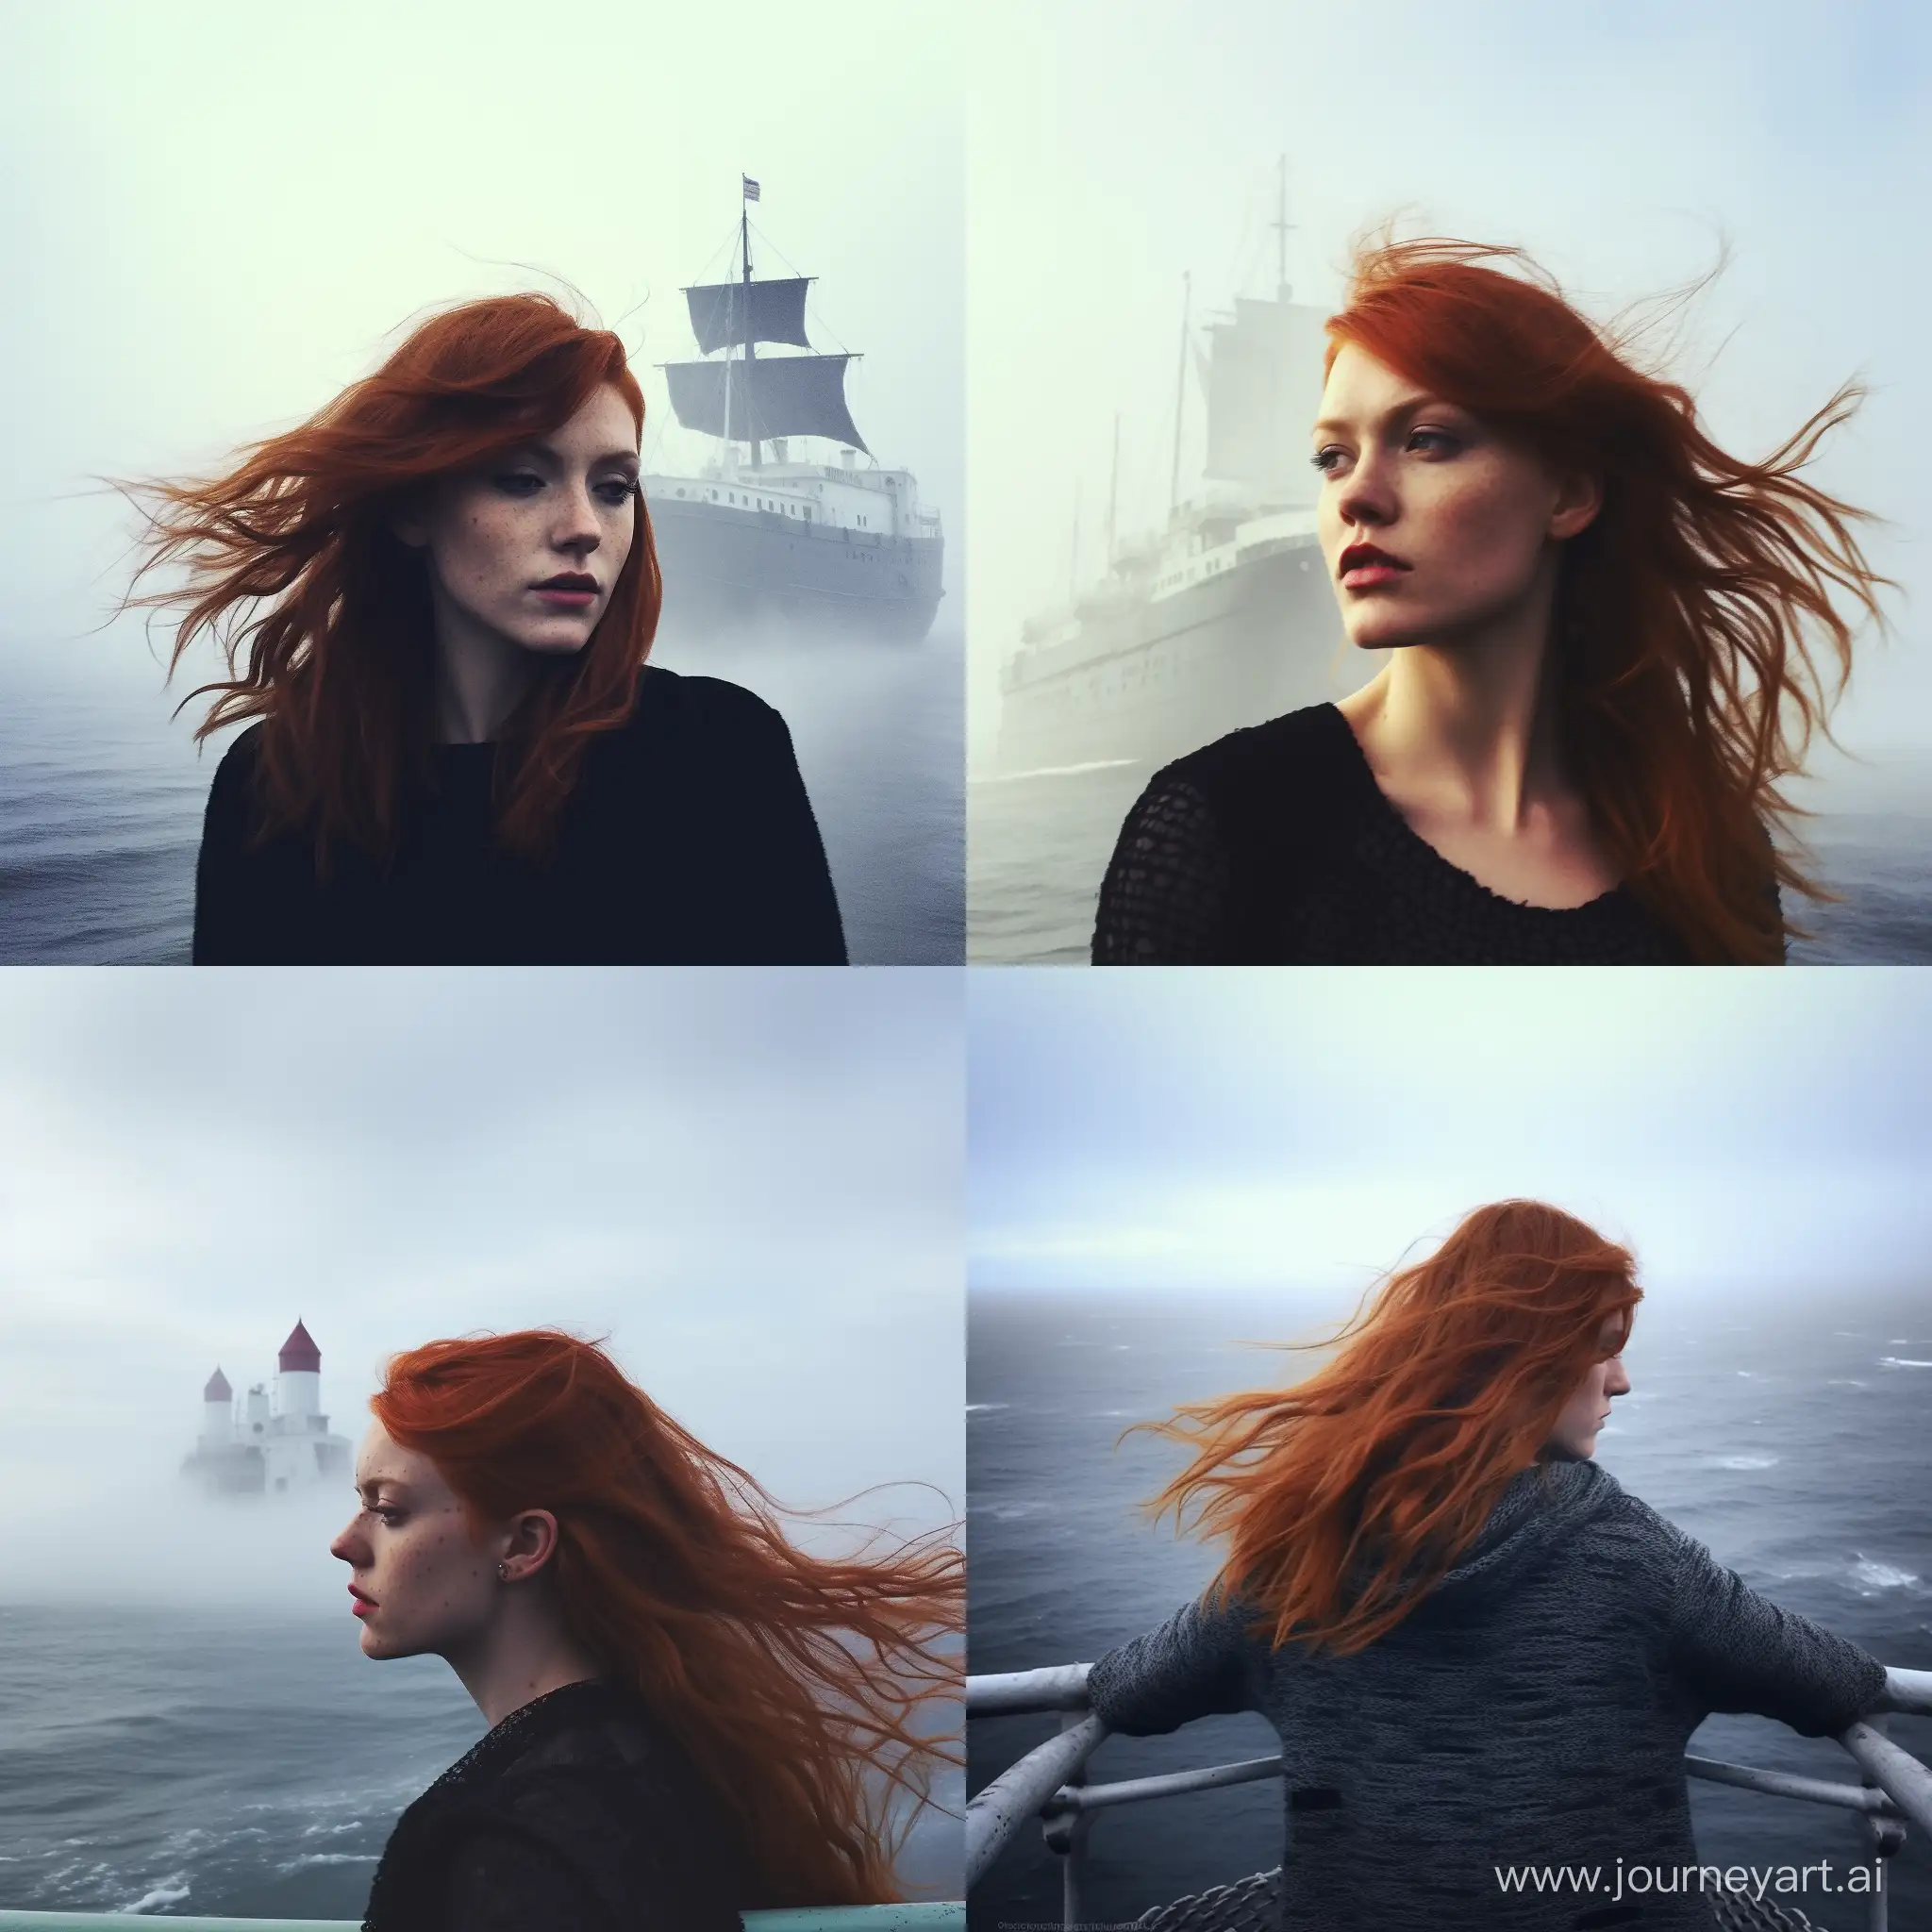 RedHaired-Girl-on-a-Ship-in-Cold-Ocean-Fog